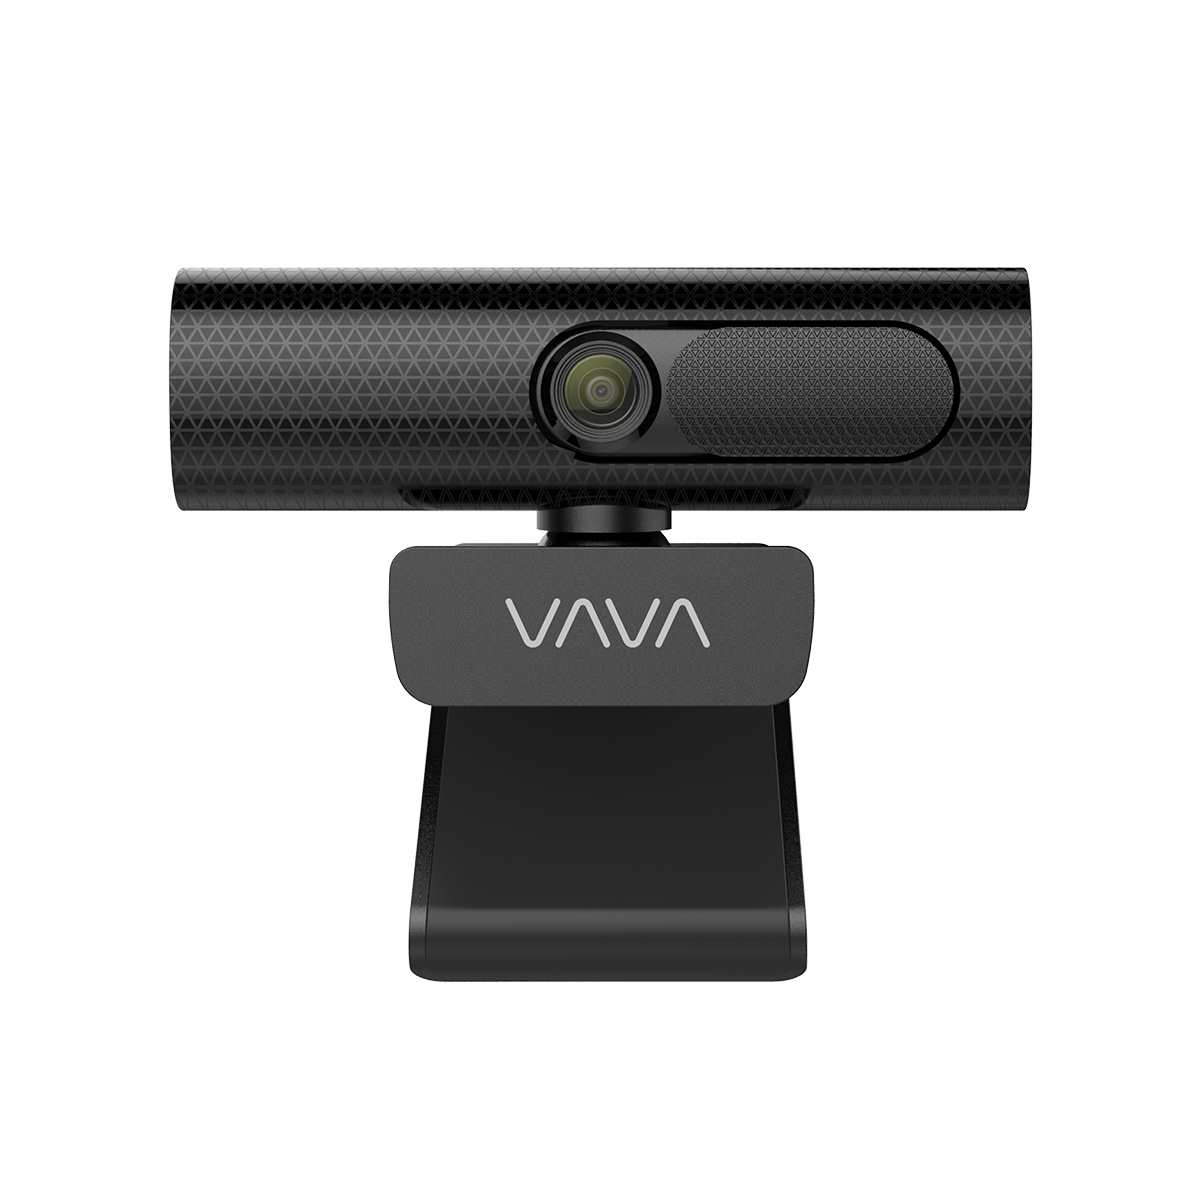 The Front of VAVA 2K webcam